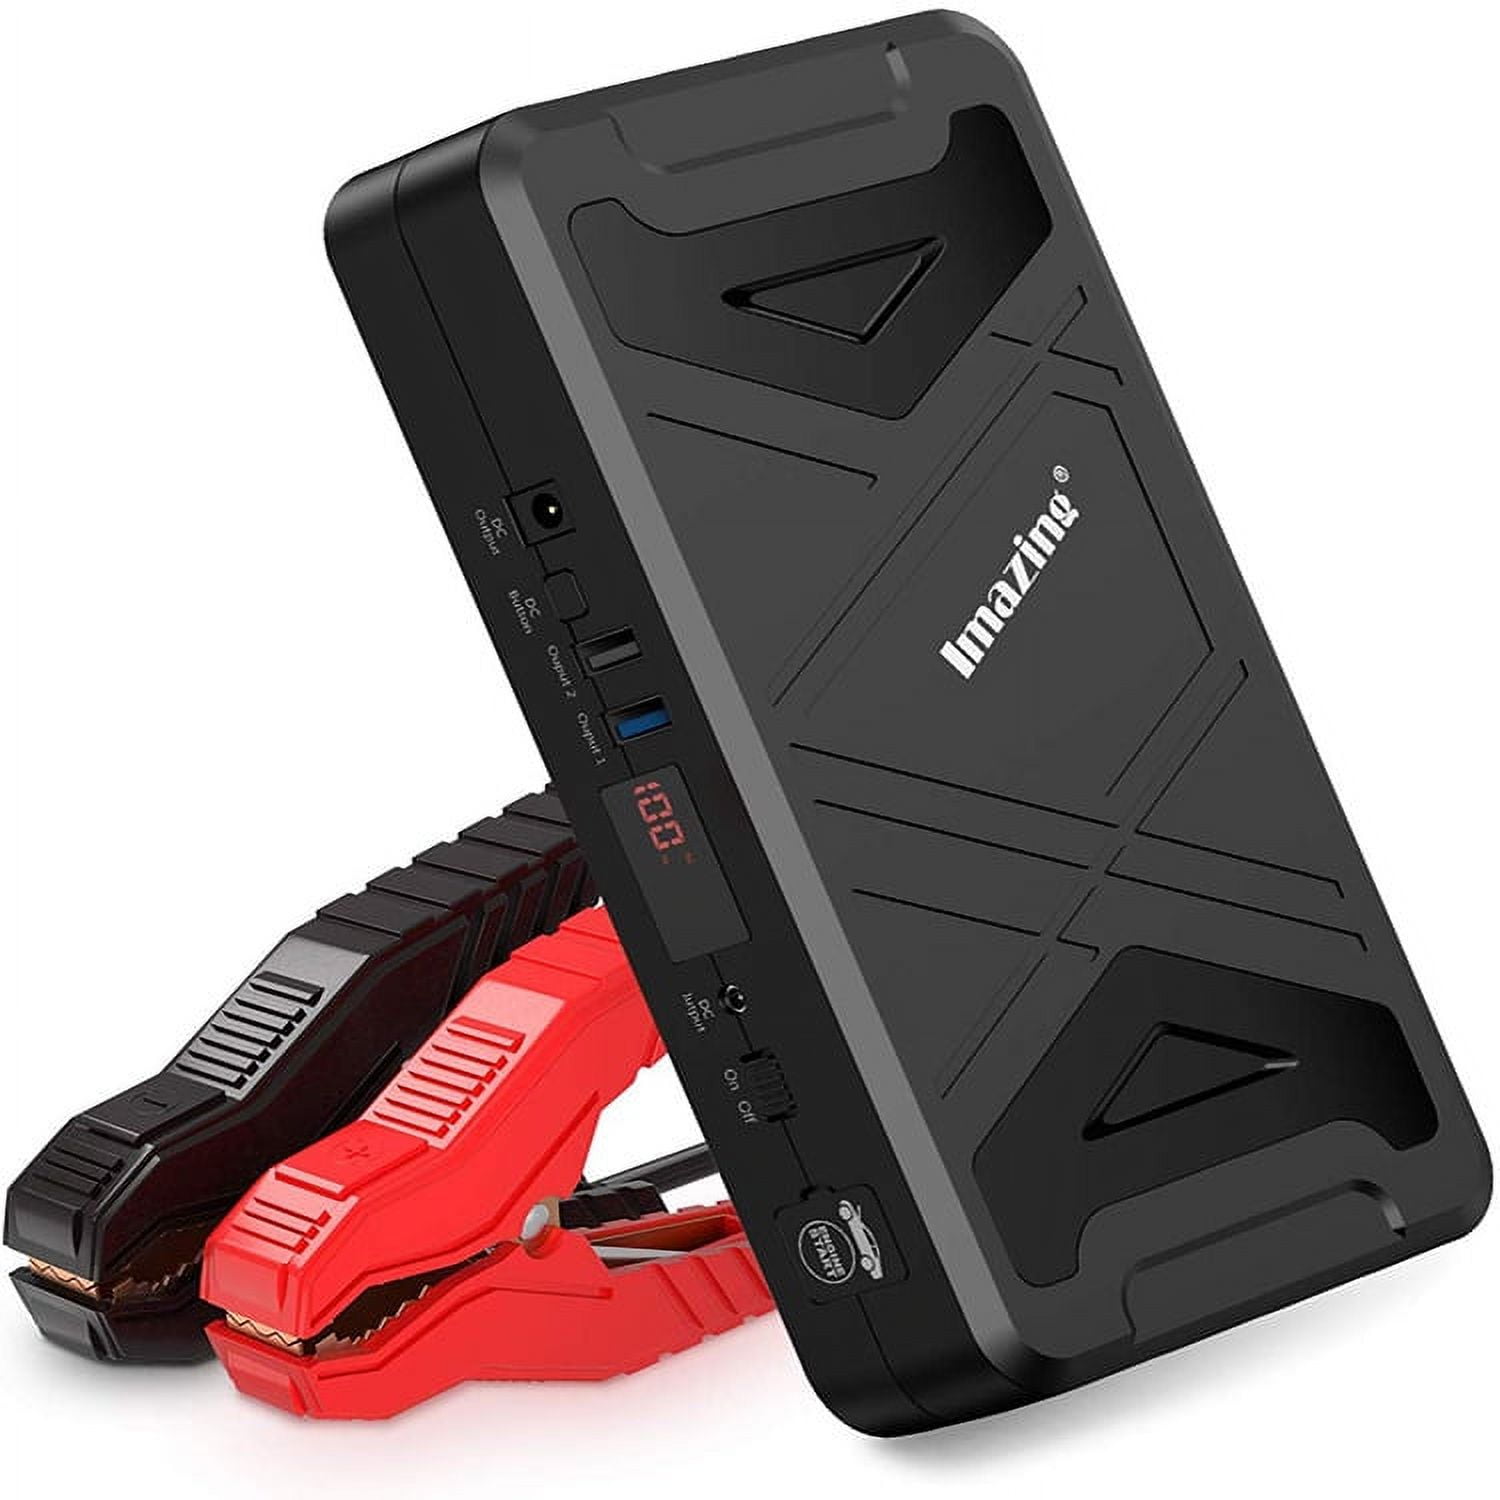 Imazing Portable Car Lithium Jump Starter - 2500A Peak 21000mAh (Up to 10L  Gas or 10L Diesel Engine) 12V Auto Battery Booster Power Pack with Jumper